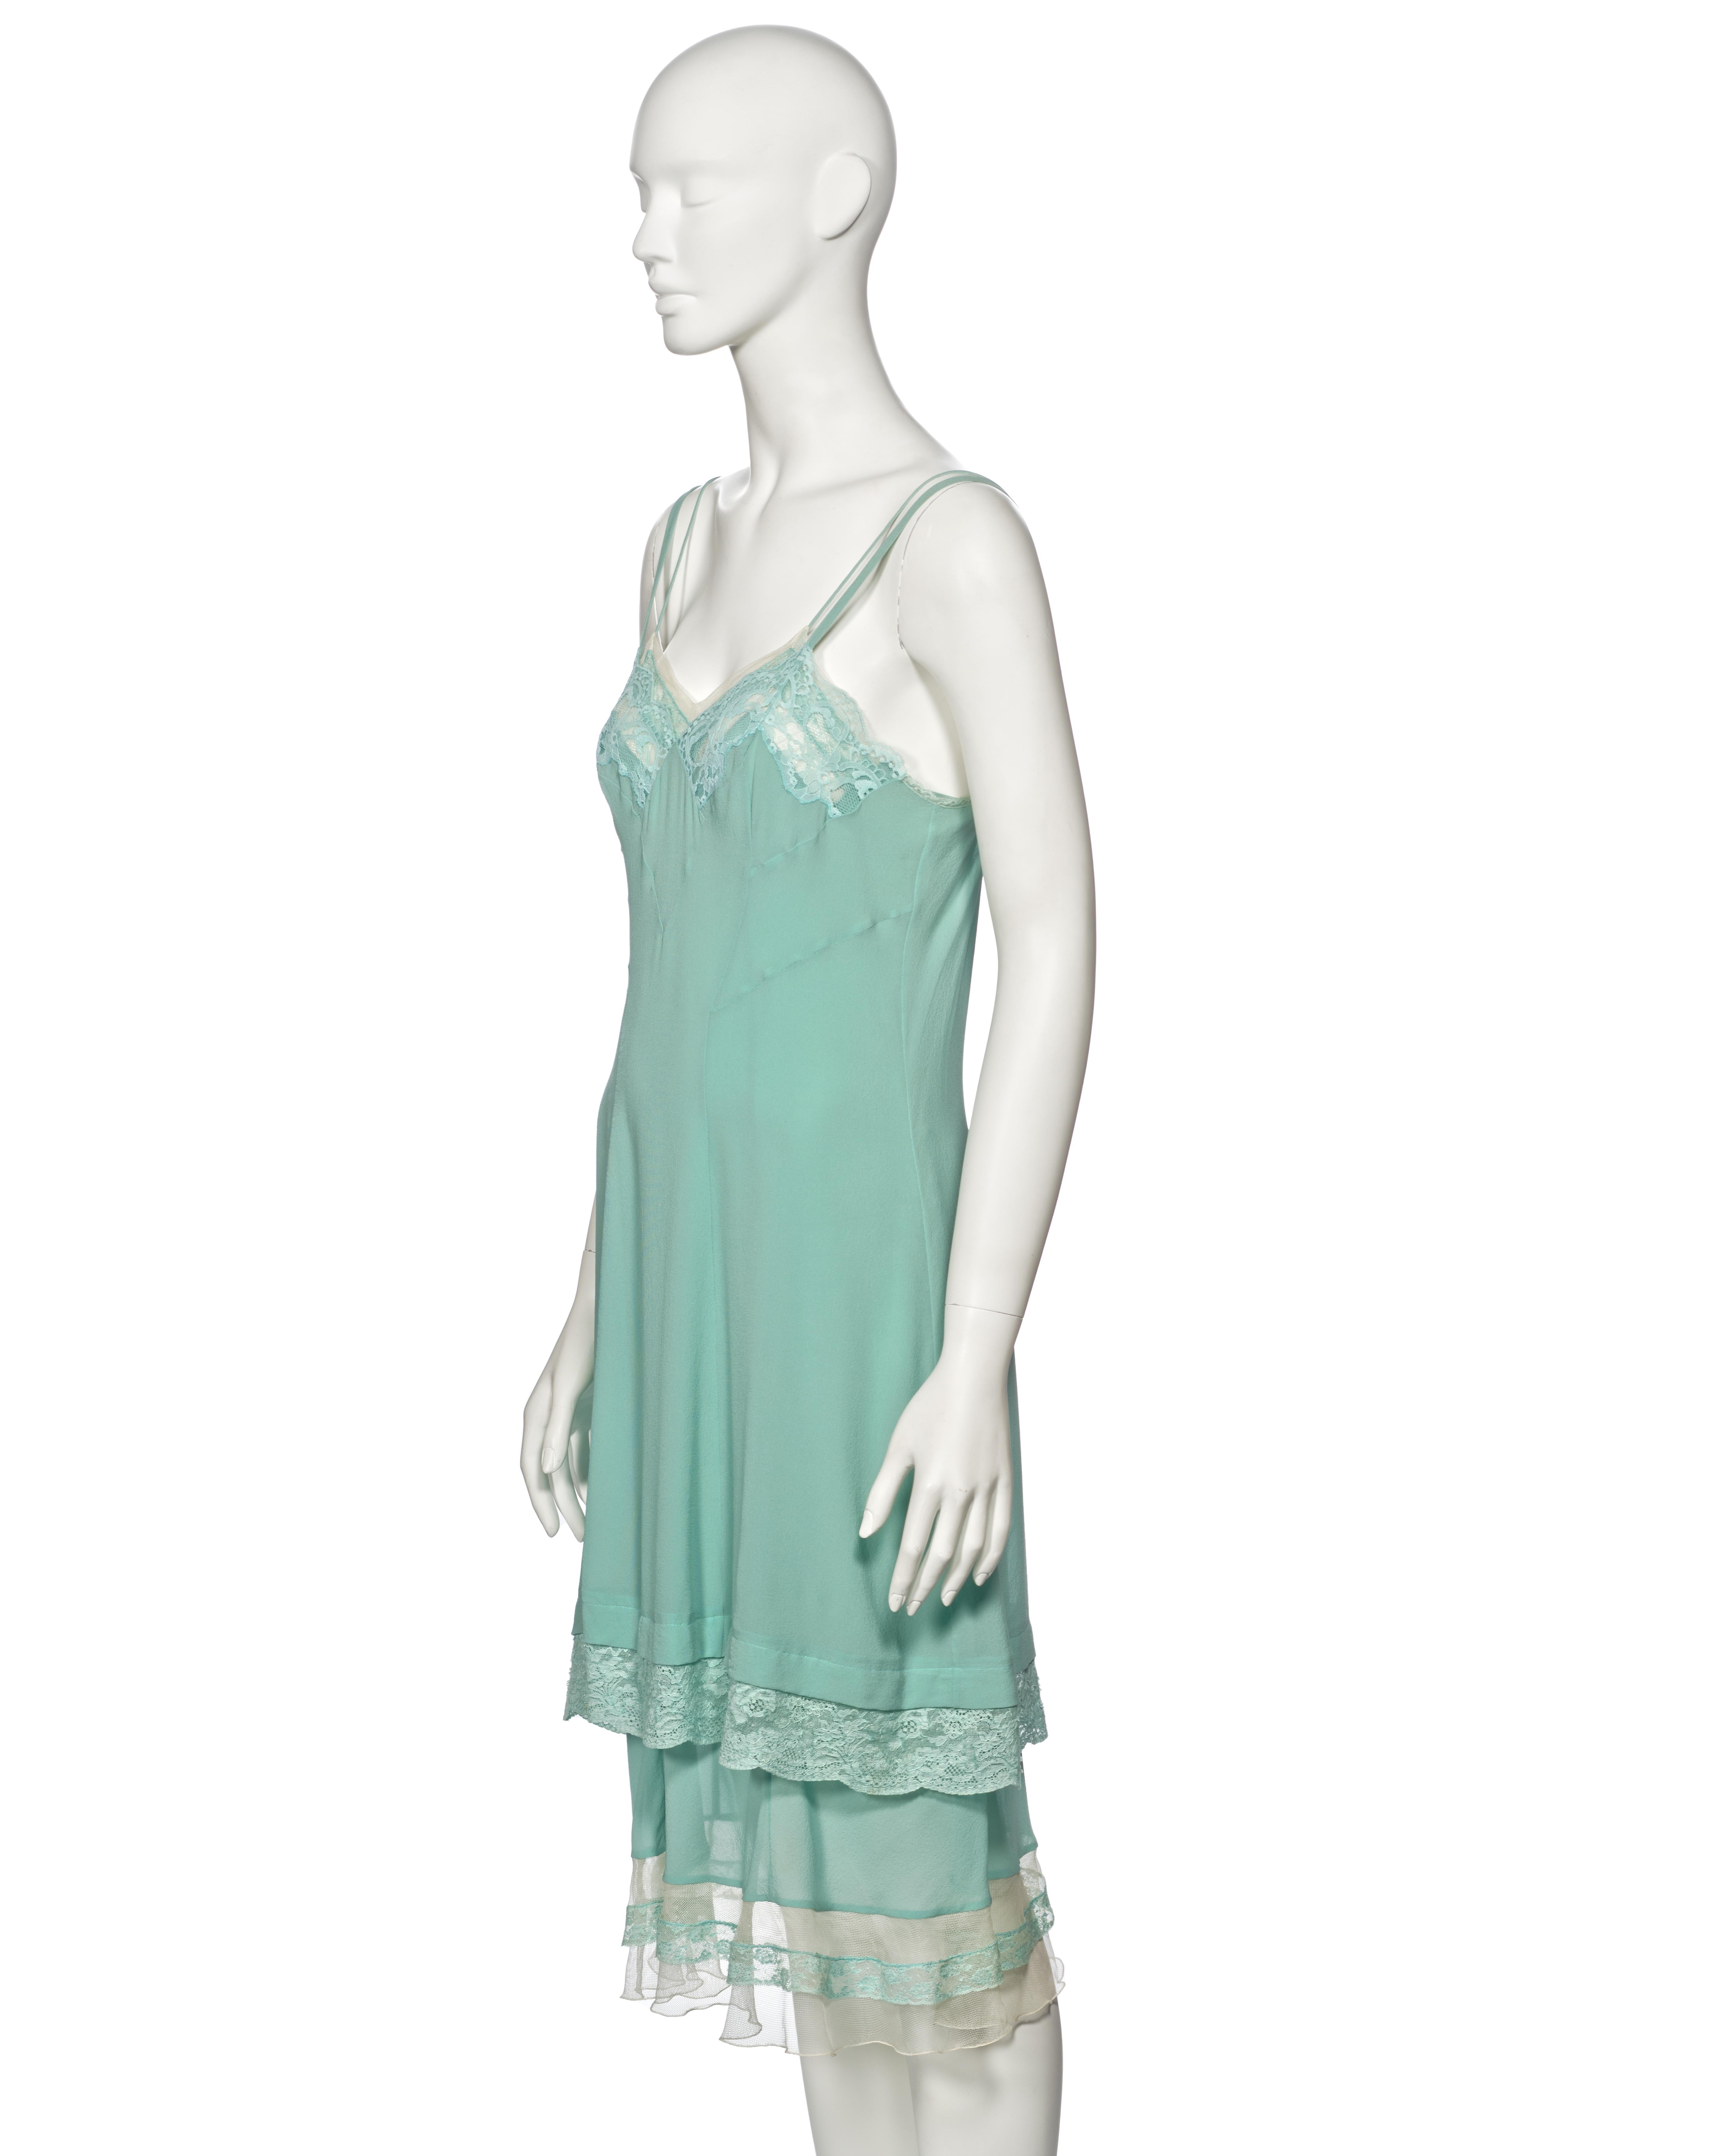 Christian Dior by John Galliano Turquoise Silk Double Layered Dress, ss 2005 5